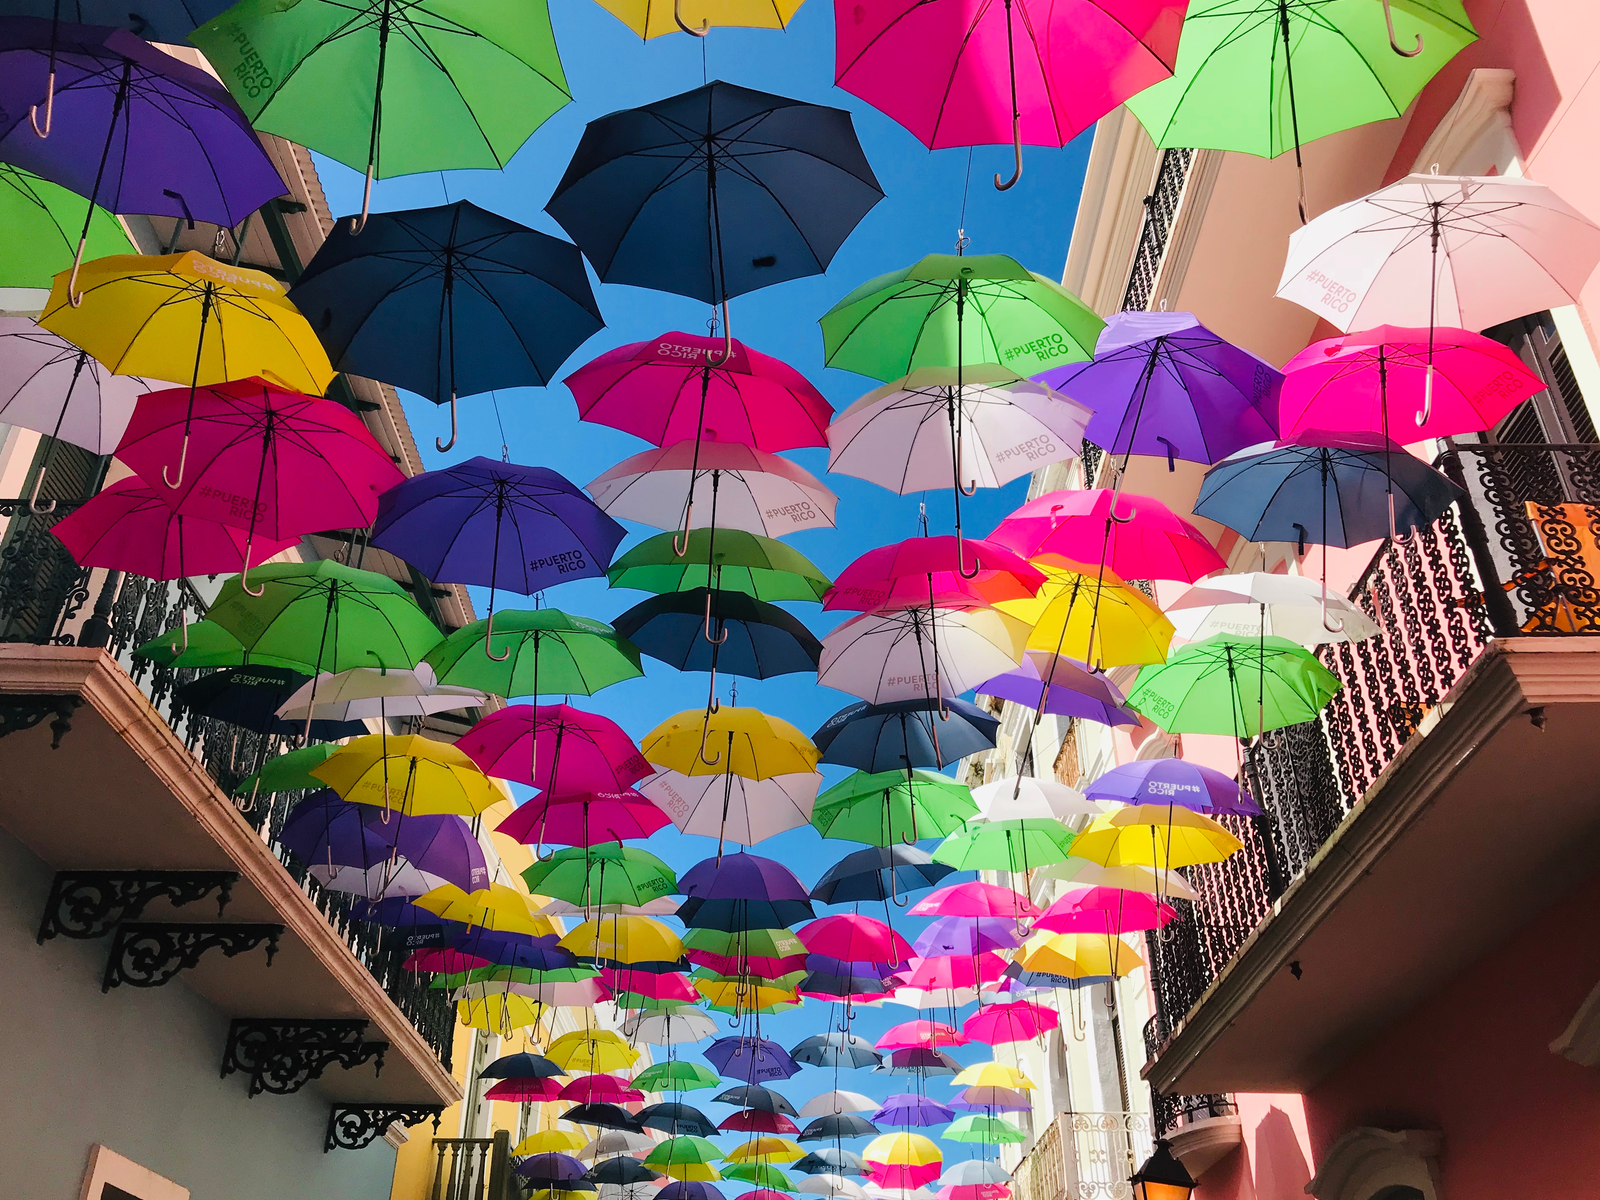 Vibrant umbrellas dangling above the street in Old San Juan, one of the best places to visit in Puerto Rico